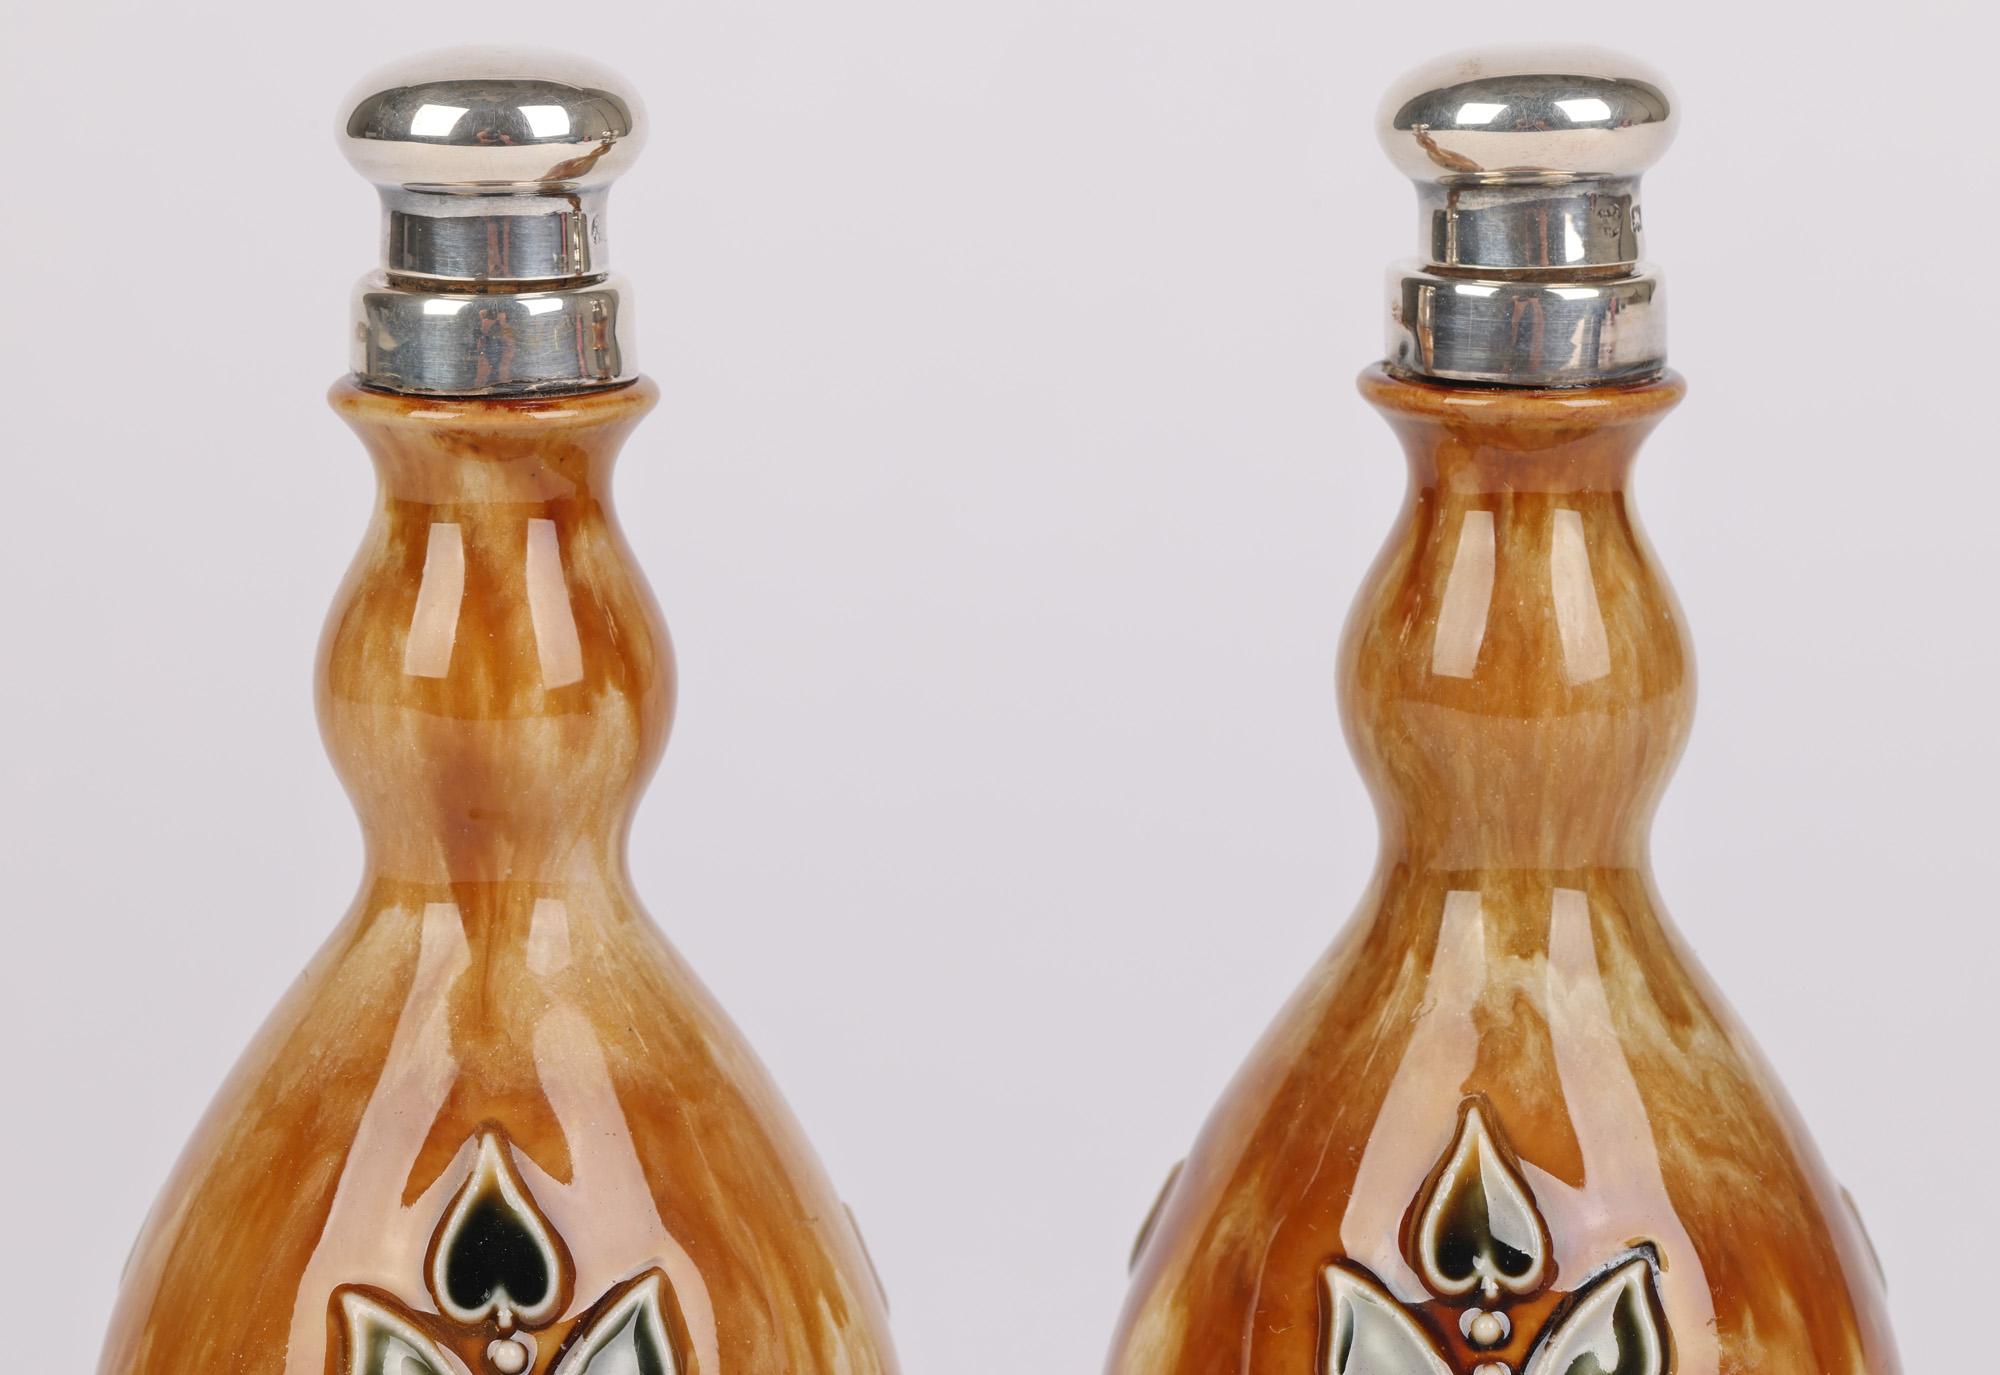 A very rare pair Doulton Lambeth silver mounted rose water flasks decorated with Art Nouveau styled floral designs by Miss O Heath and Winnie Bowstead and dating from 1920. The stunning pair stone ware bottle shaped flasks stand on flat round